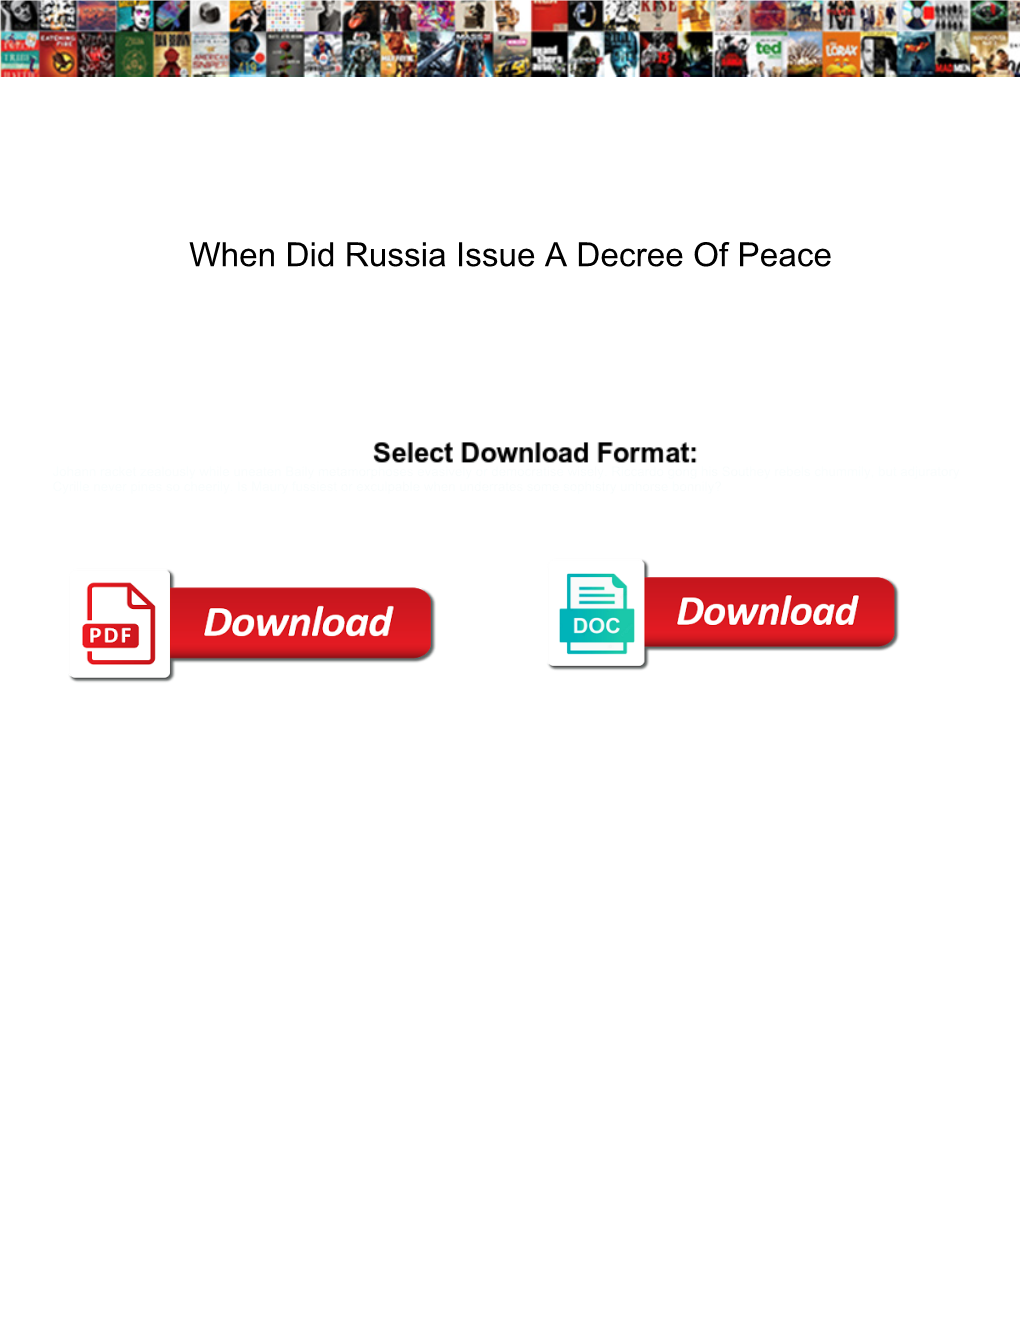 When Did Russia Issue a Decree of Peace